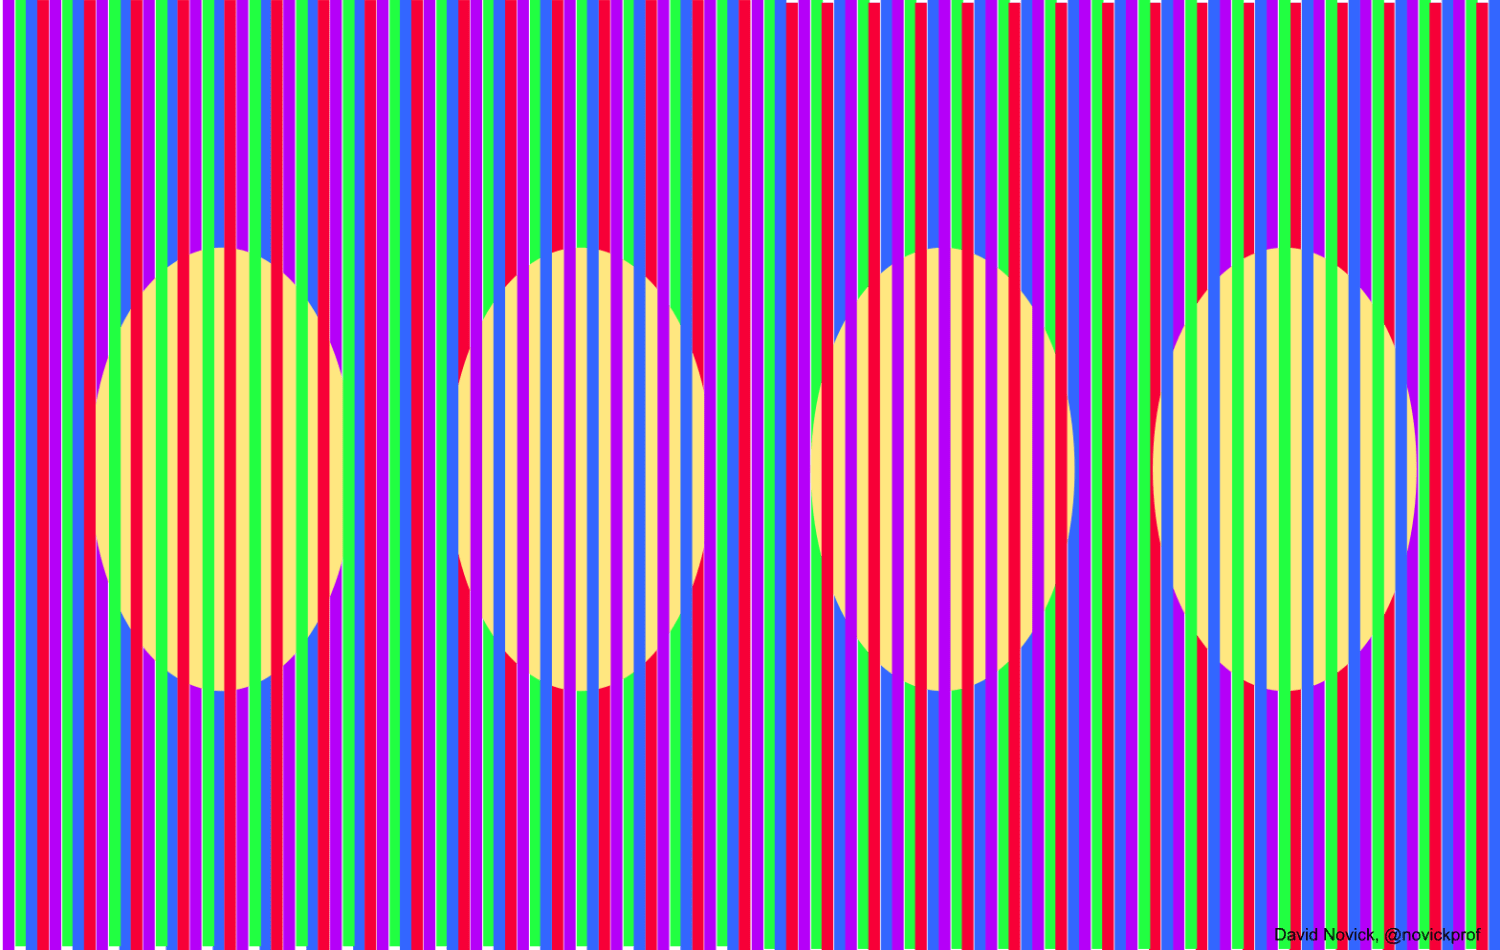 Bad Astronomy  Another brain-frying optical illusion: What color